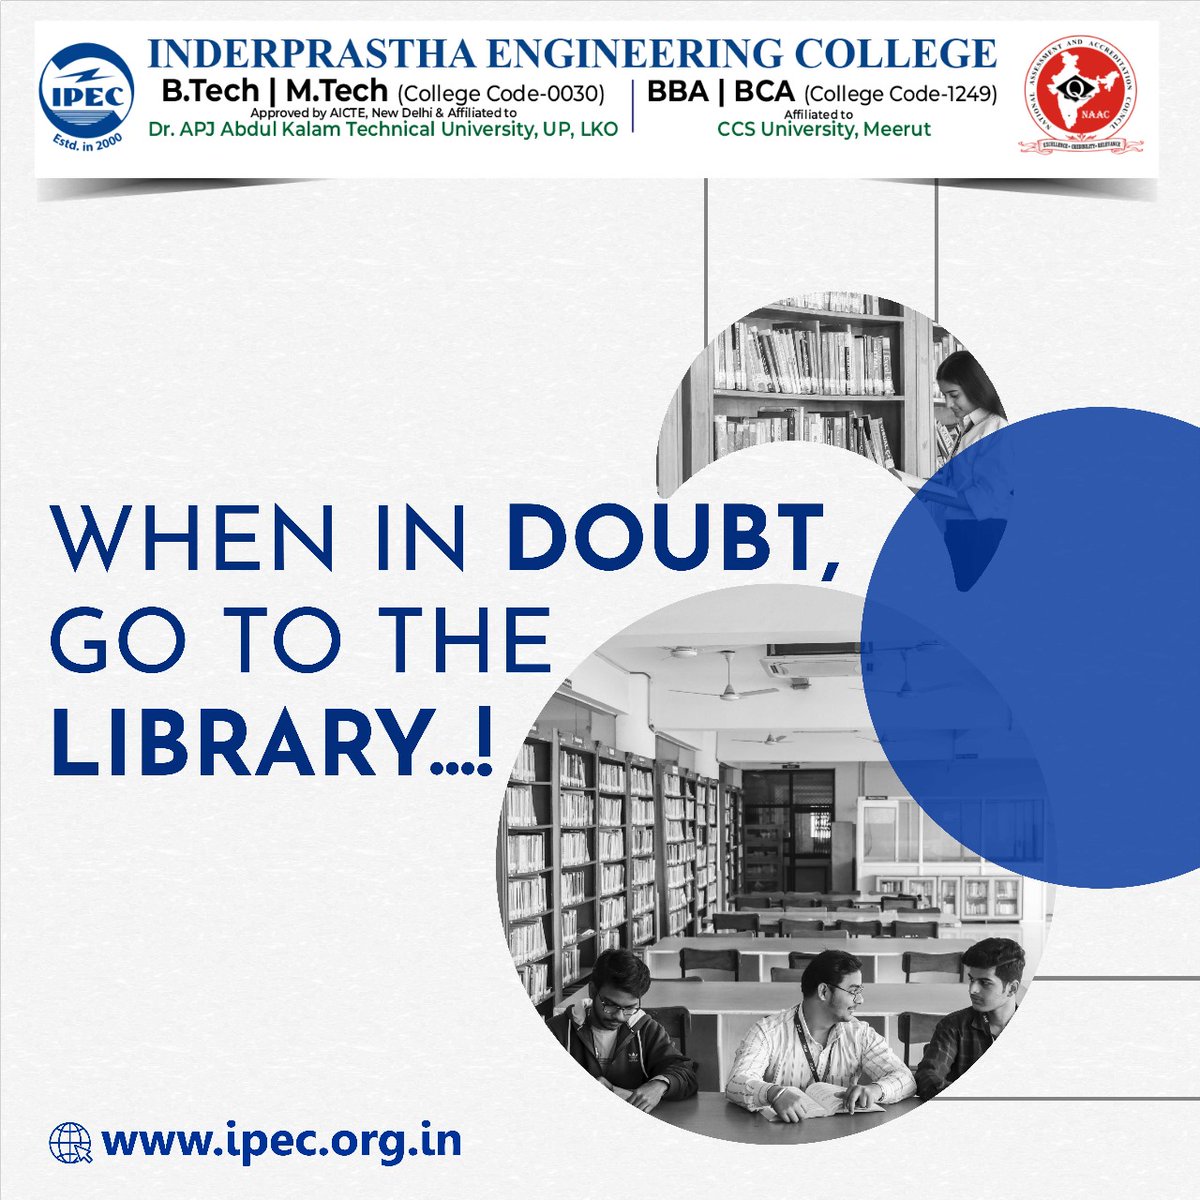 Avail a world class variety of books only at Inderprastha Engineering College Library..!

#InderprasthaEngineeringCollege #ipec #ipec30
#LibraryTreasures #BookwormParadise #KnowledgeHub #ReadersDelight #ExploreBooks #LiteraryWorld #LibraryLife #BookLoversCommunity